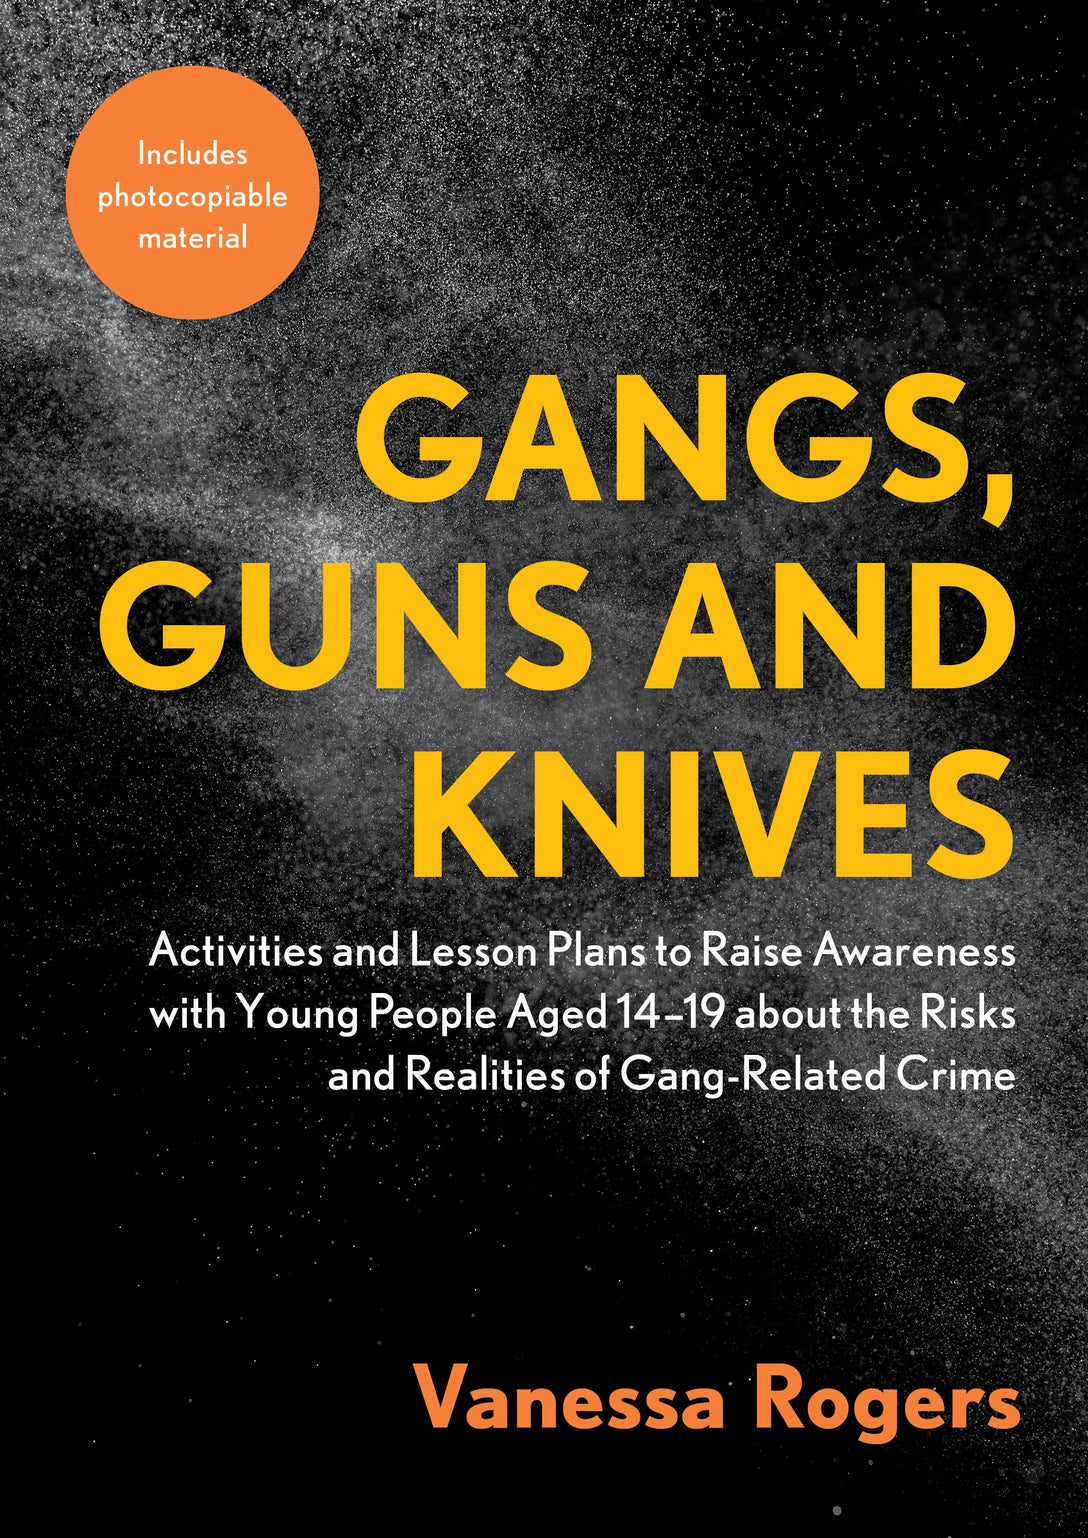 Gangs, Guns and Knives by Vanessa Rogers